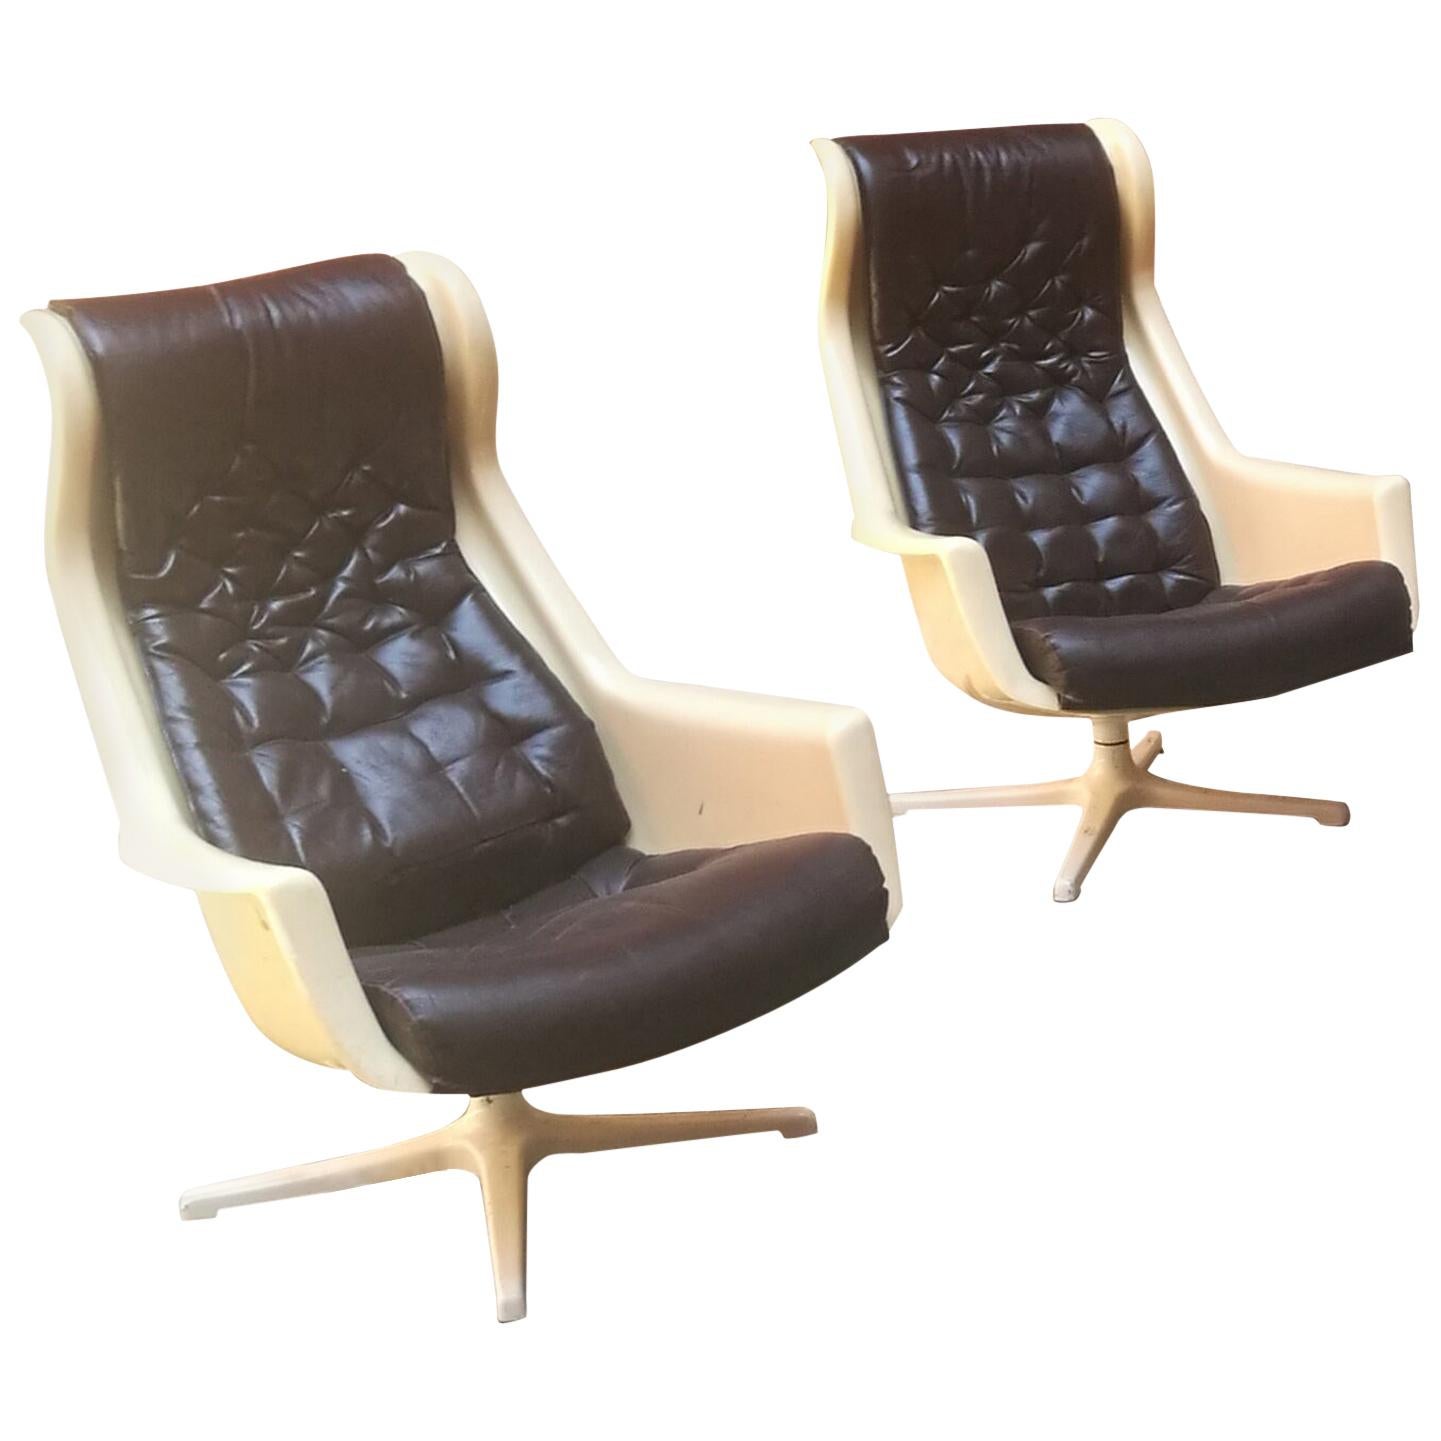 Swedes midcentury modern Space Age Armchairs Galaxy by Alf Svensson for Dux 1968